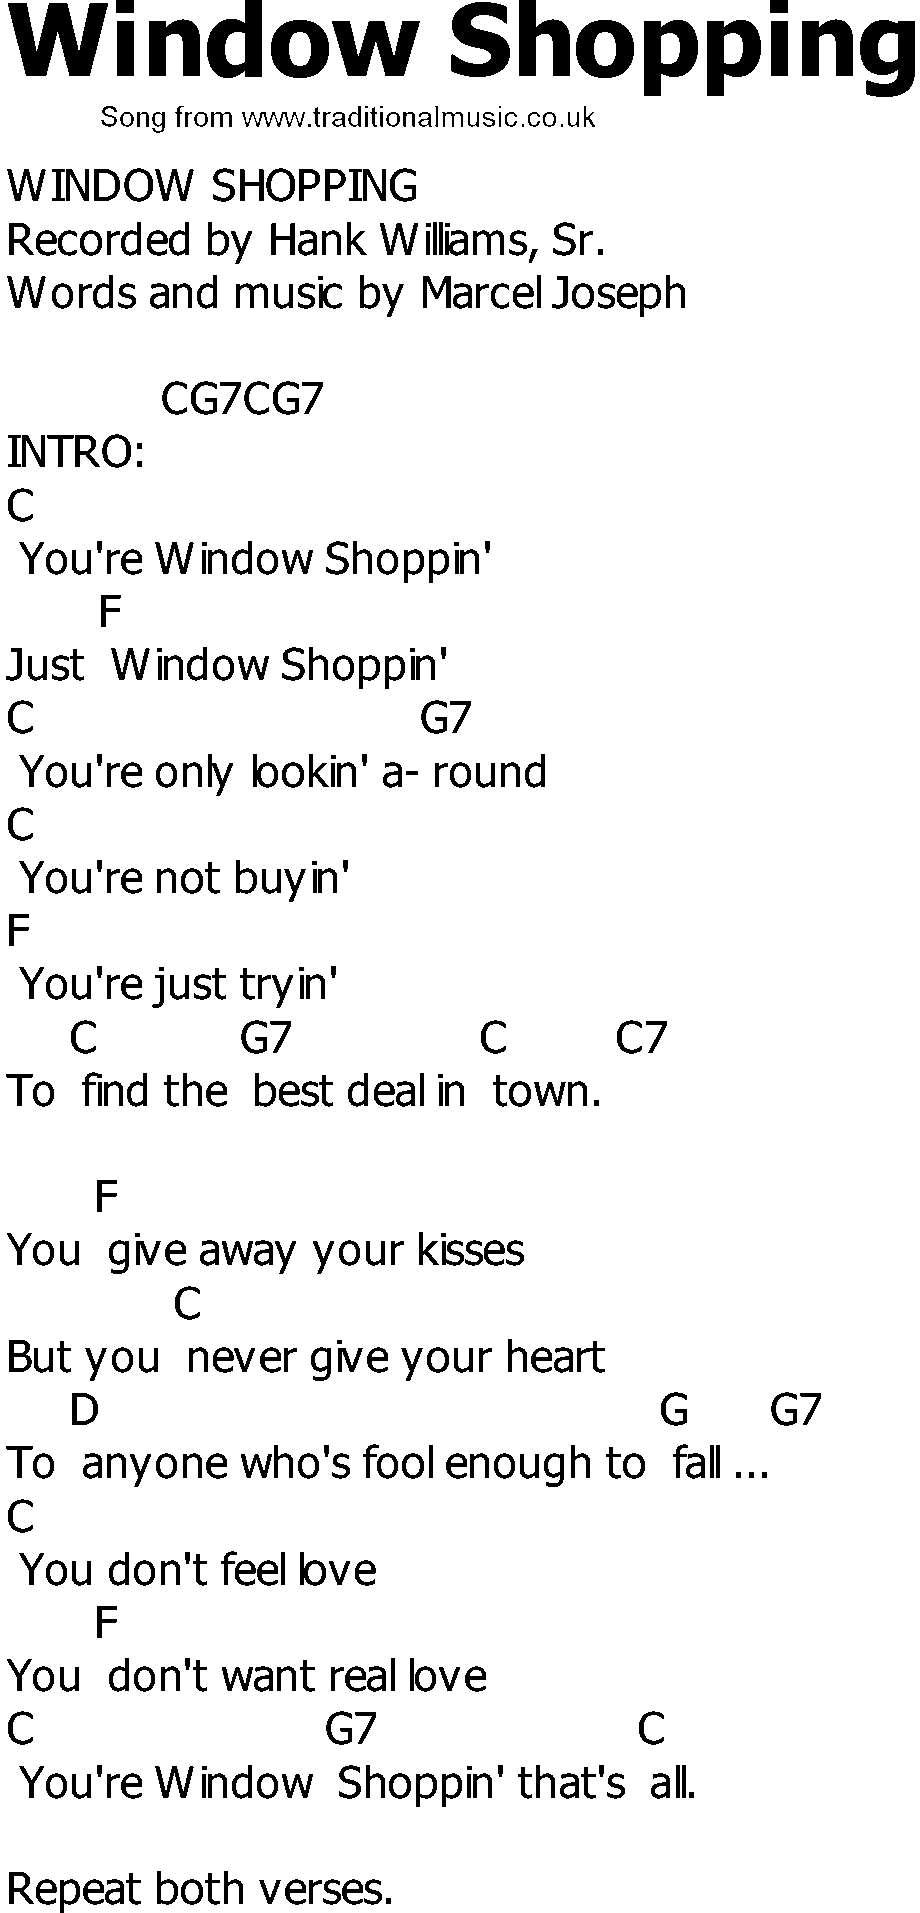 Old Country song lyrics with chords - Window Shopping